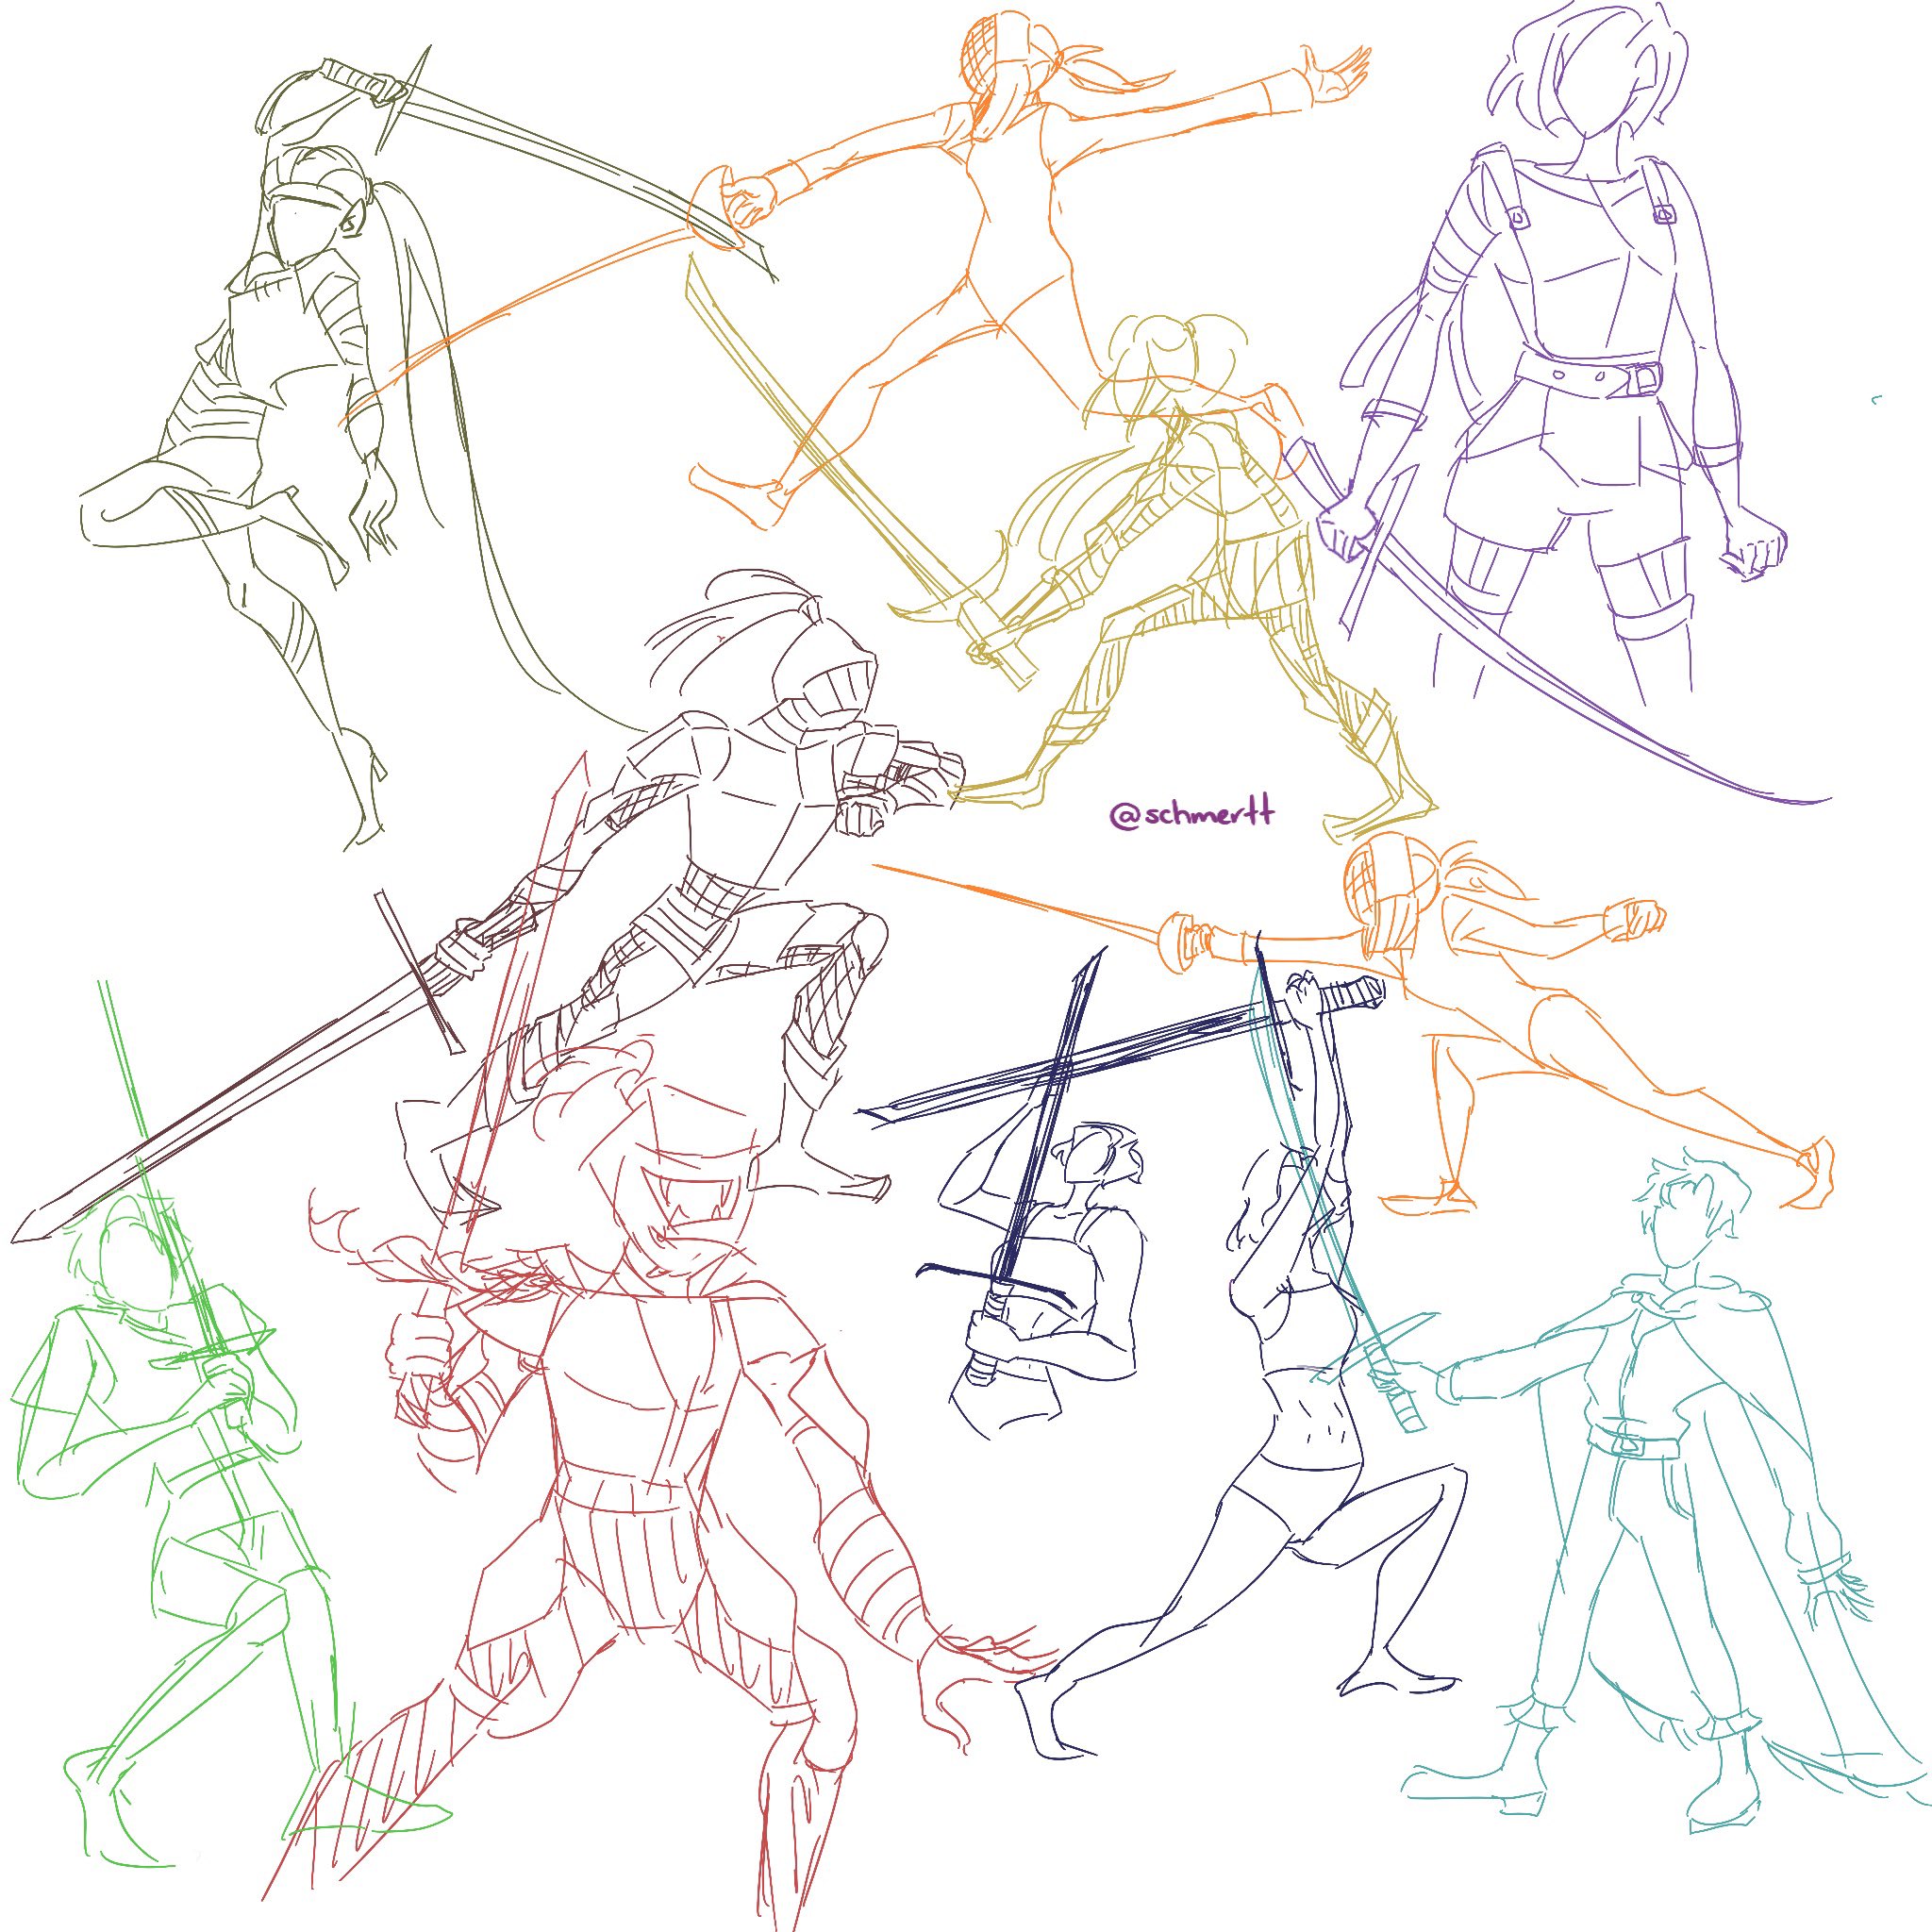 Details 87+ sword poses anime latest - in.cdgdbentre